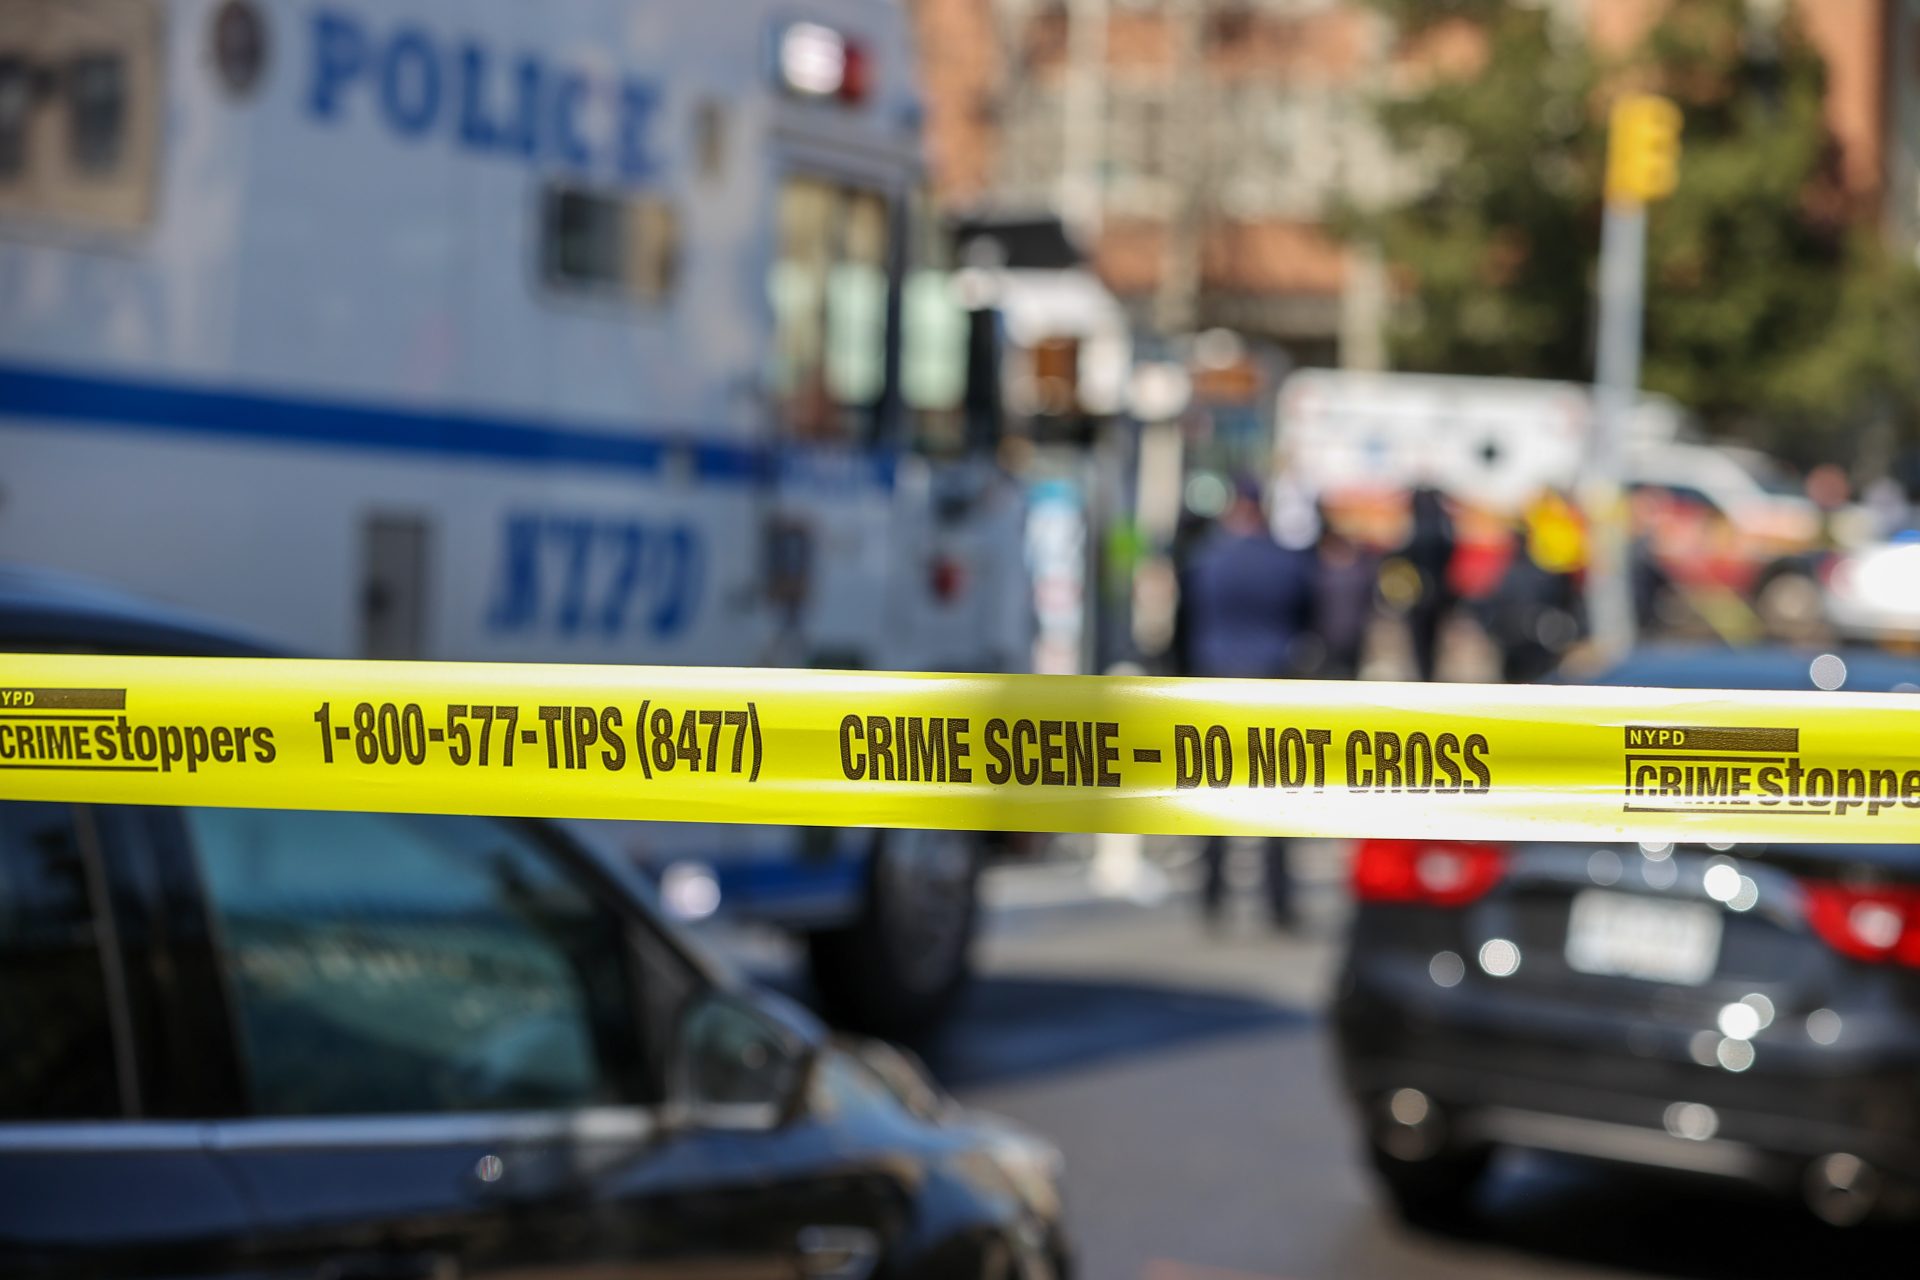 Mother, 20, Fatally Shot at Point-Blank Range With Three-Month Old Child in Tow in Upscale NYC Neighborhood